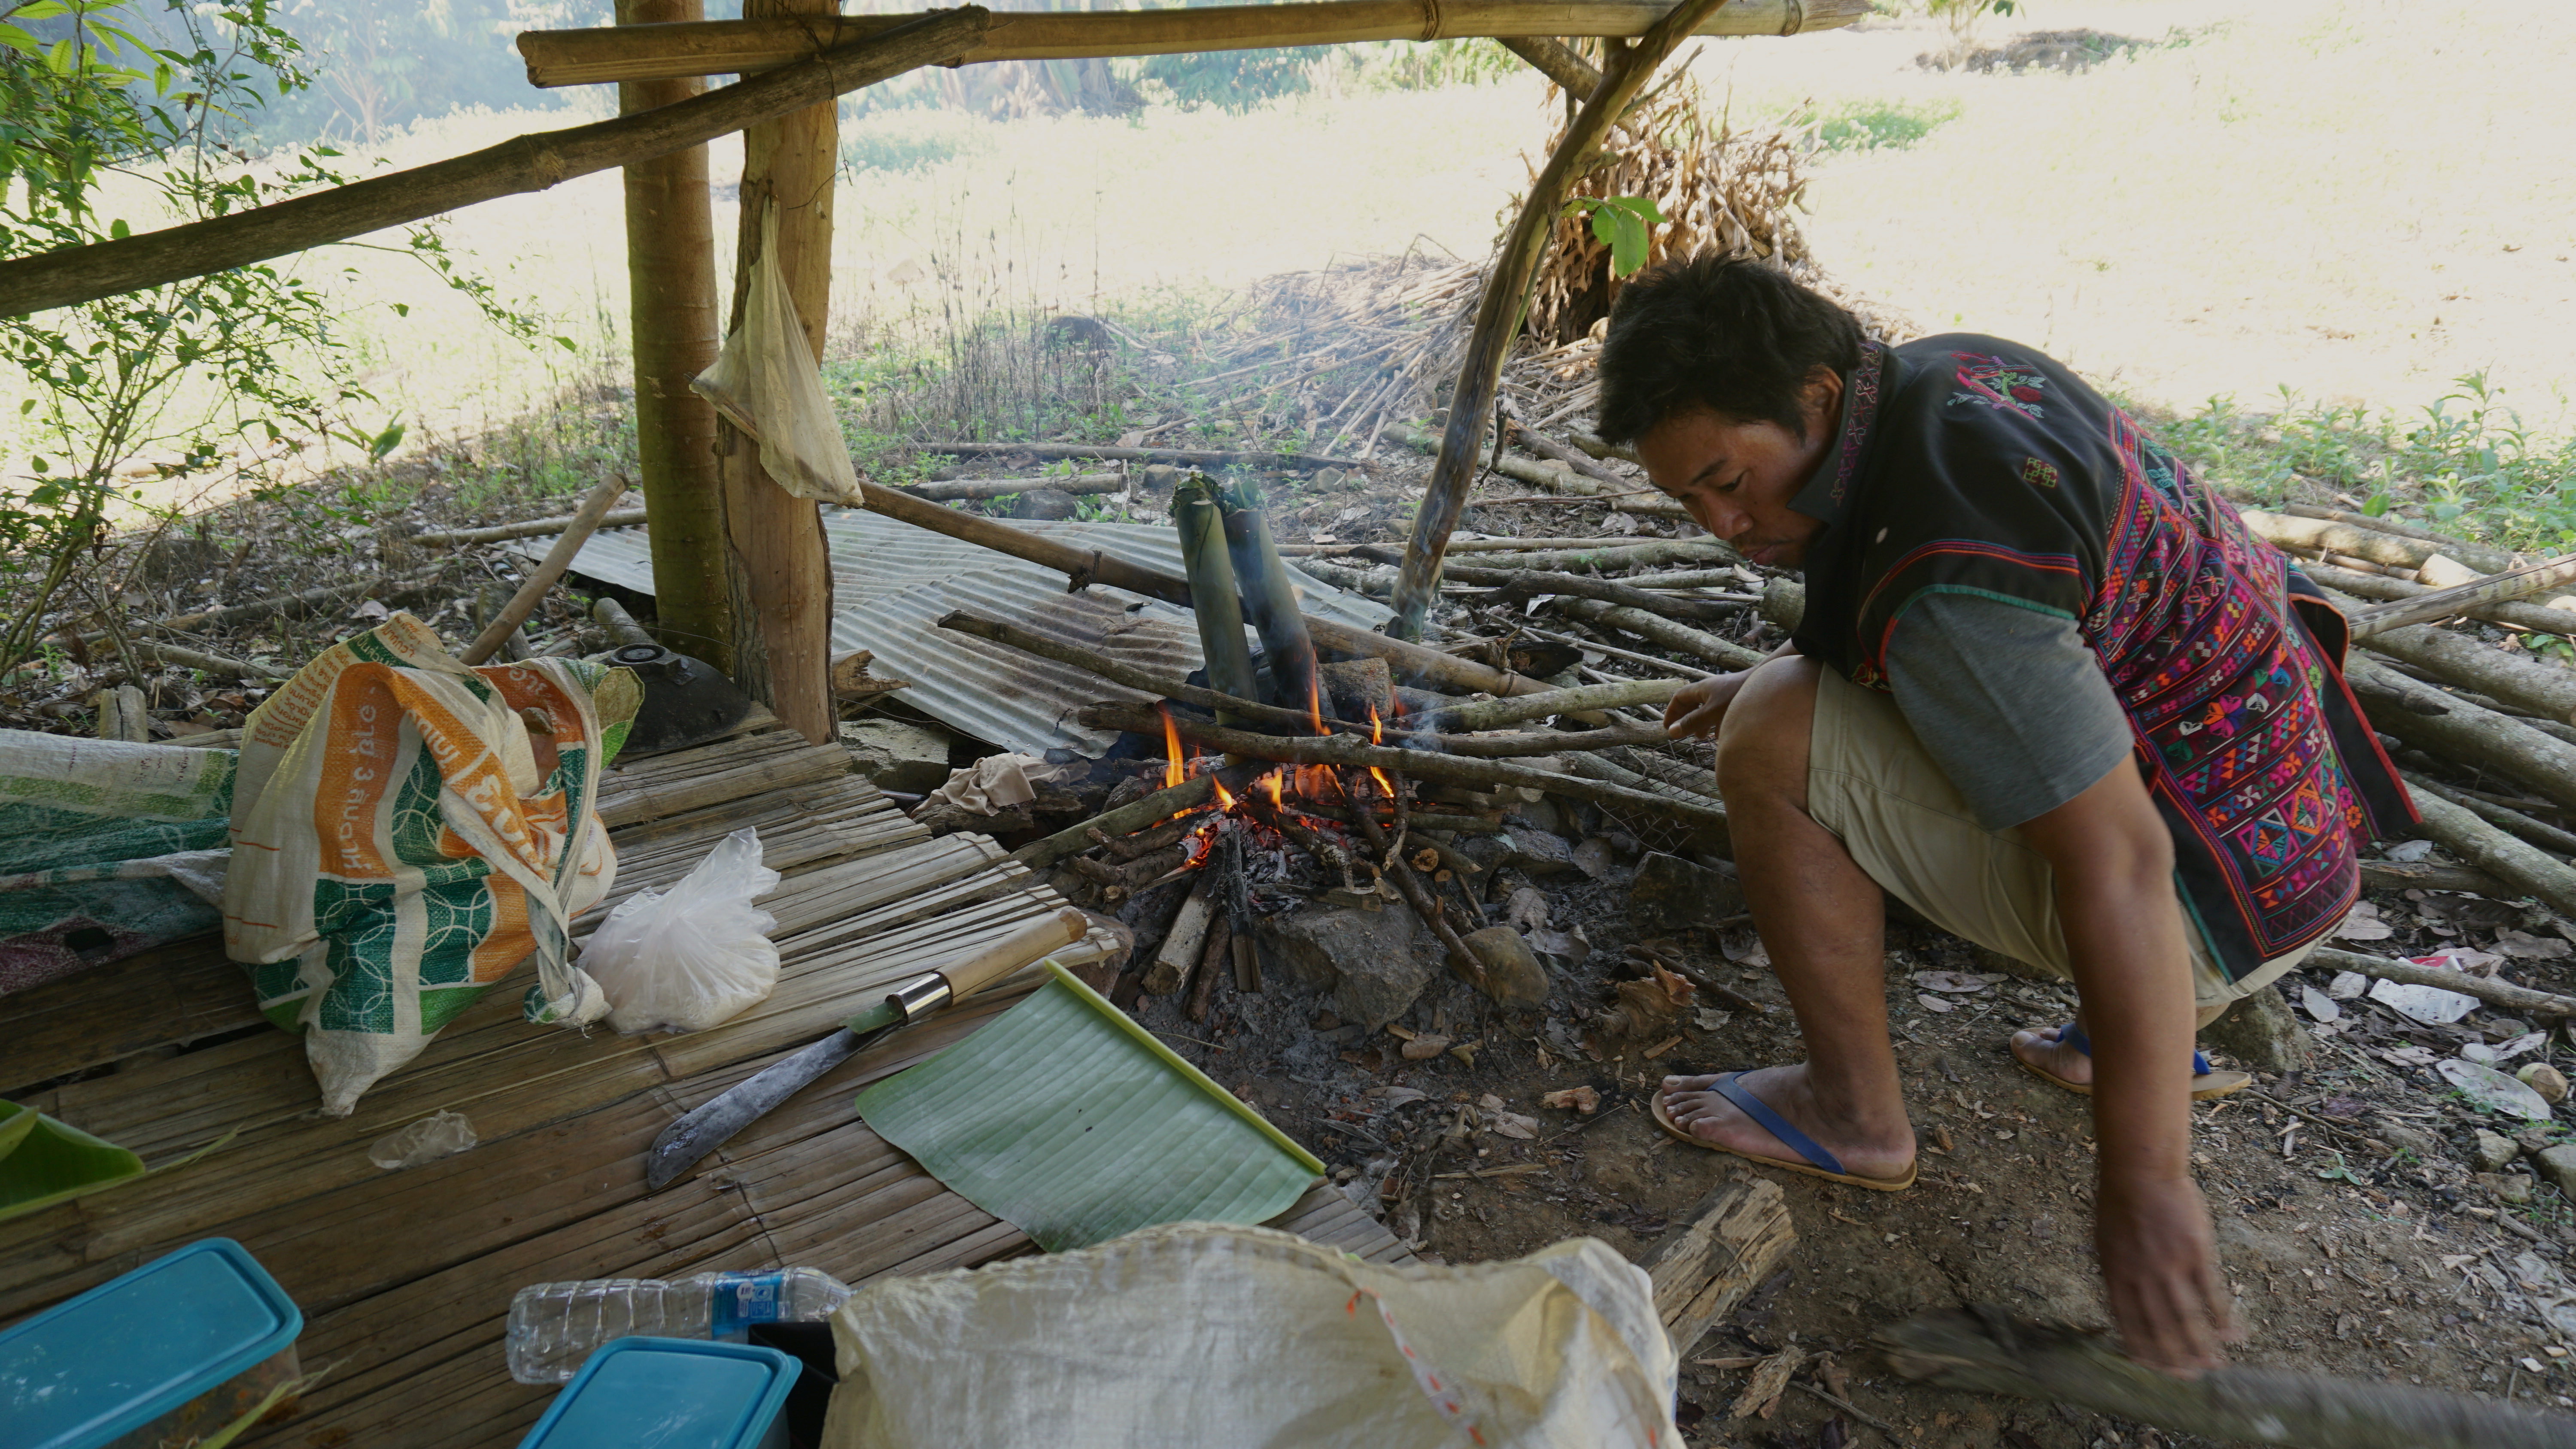 The reward for surviving the jungle hike is a delicious lunch cooked the traditional way. Food is stuffed into bamboo and cooked over fire, creating a smoky, aromatic delight.